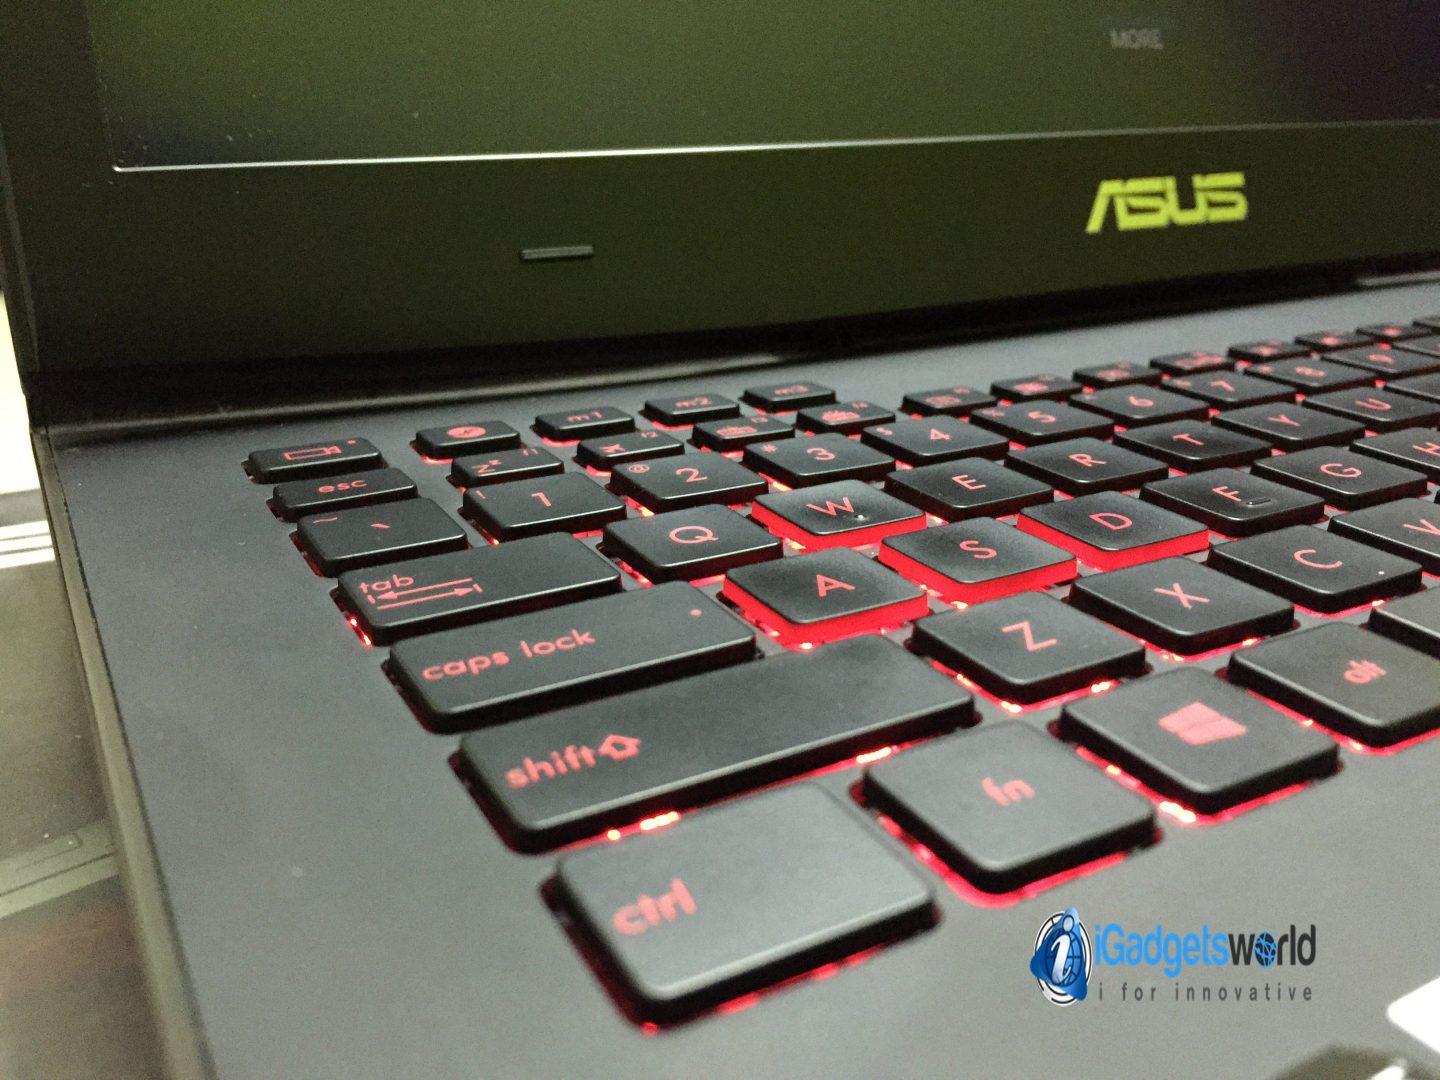 Asus ROG G751J Review: A Slightly Overpriced Ultra High-End Gaming Laptop - 24